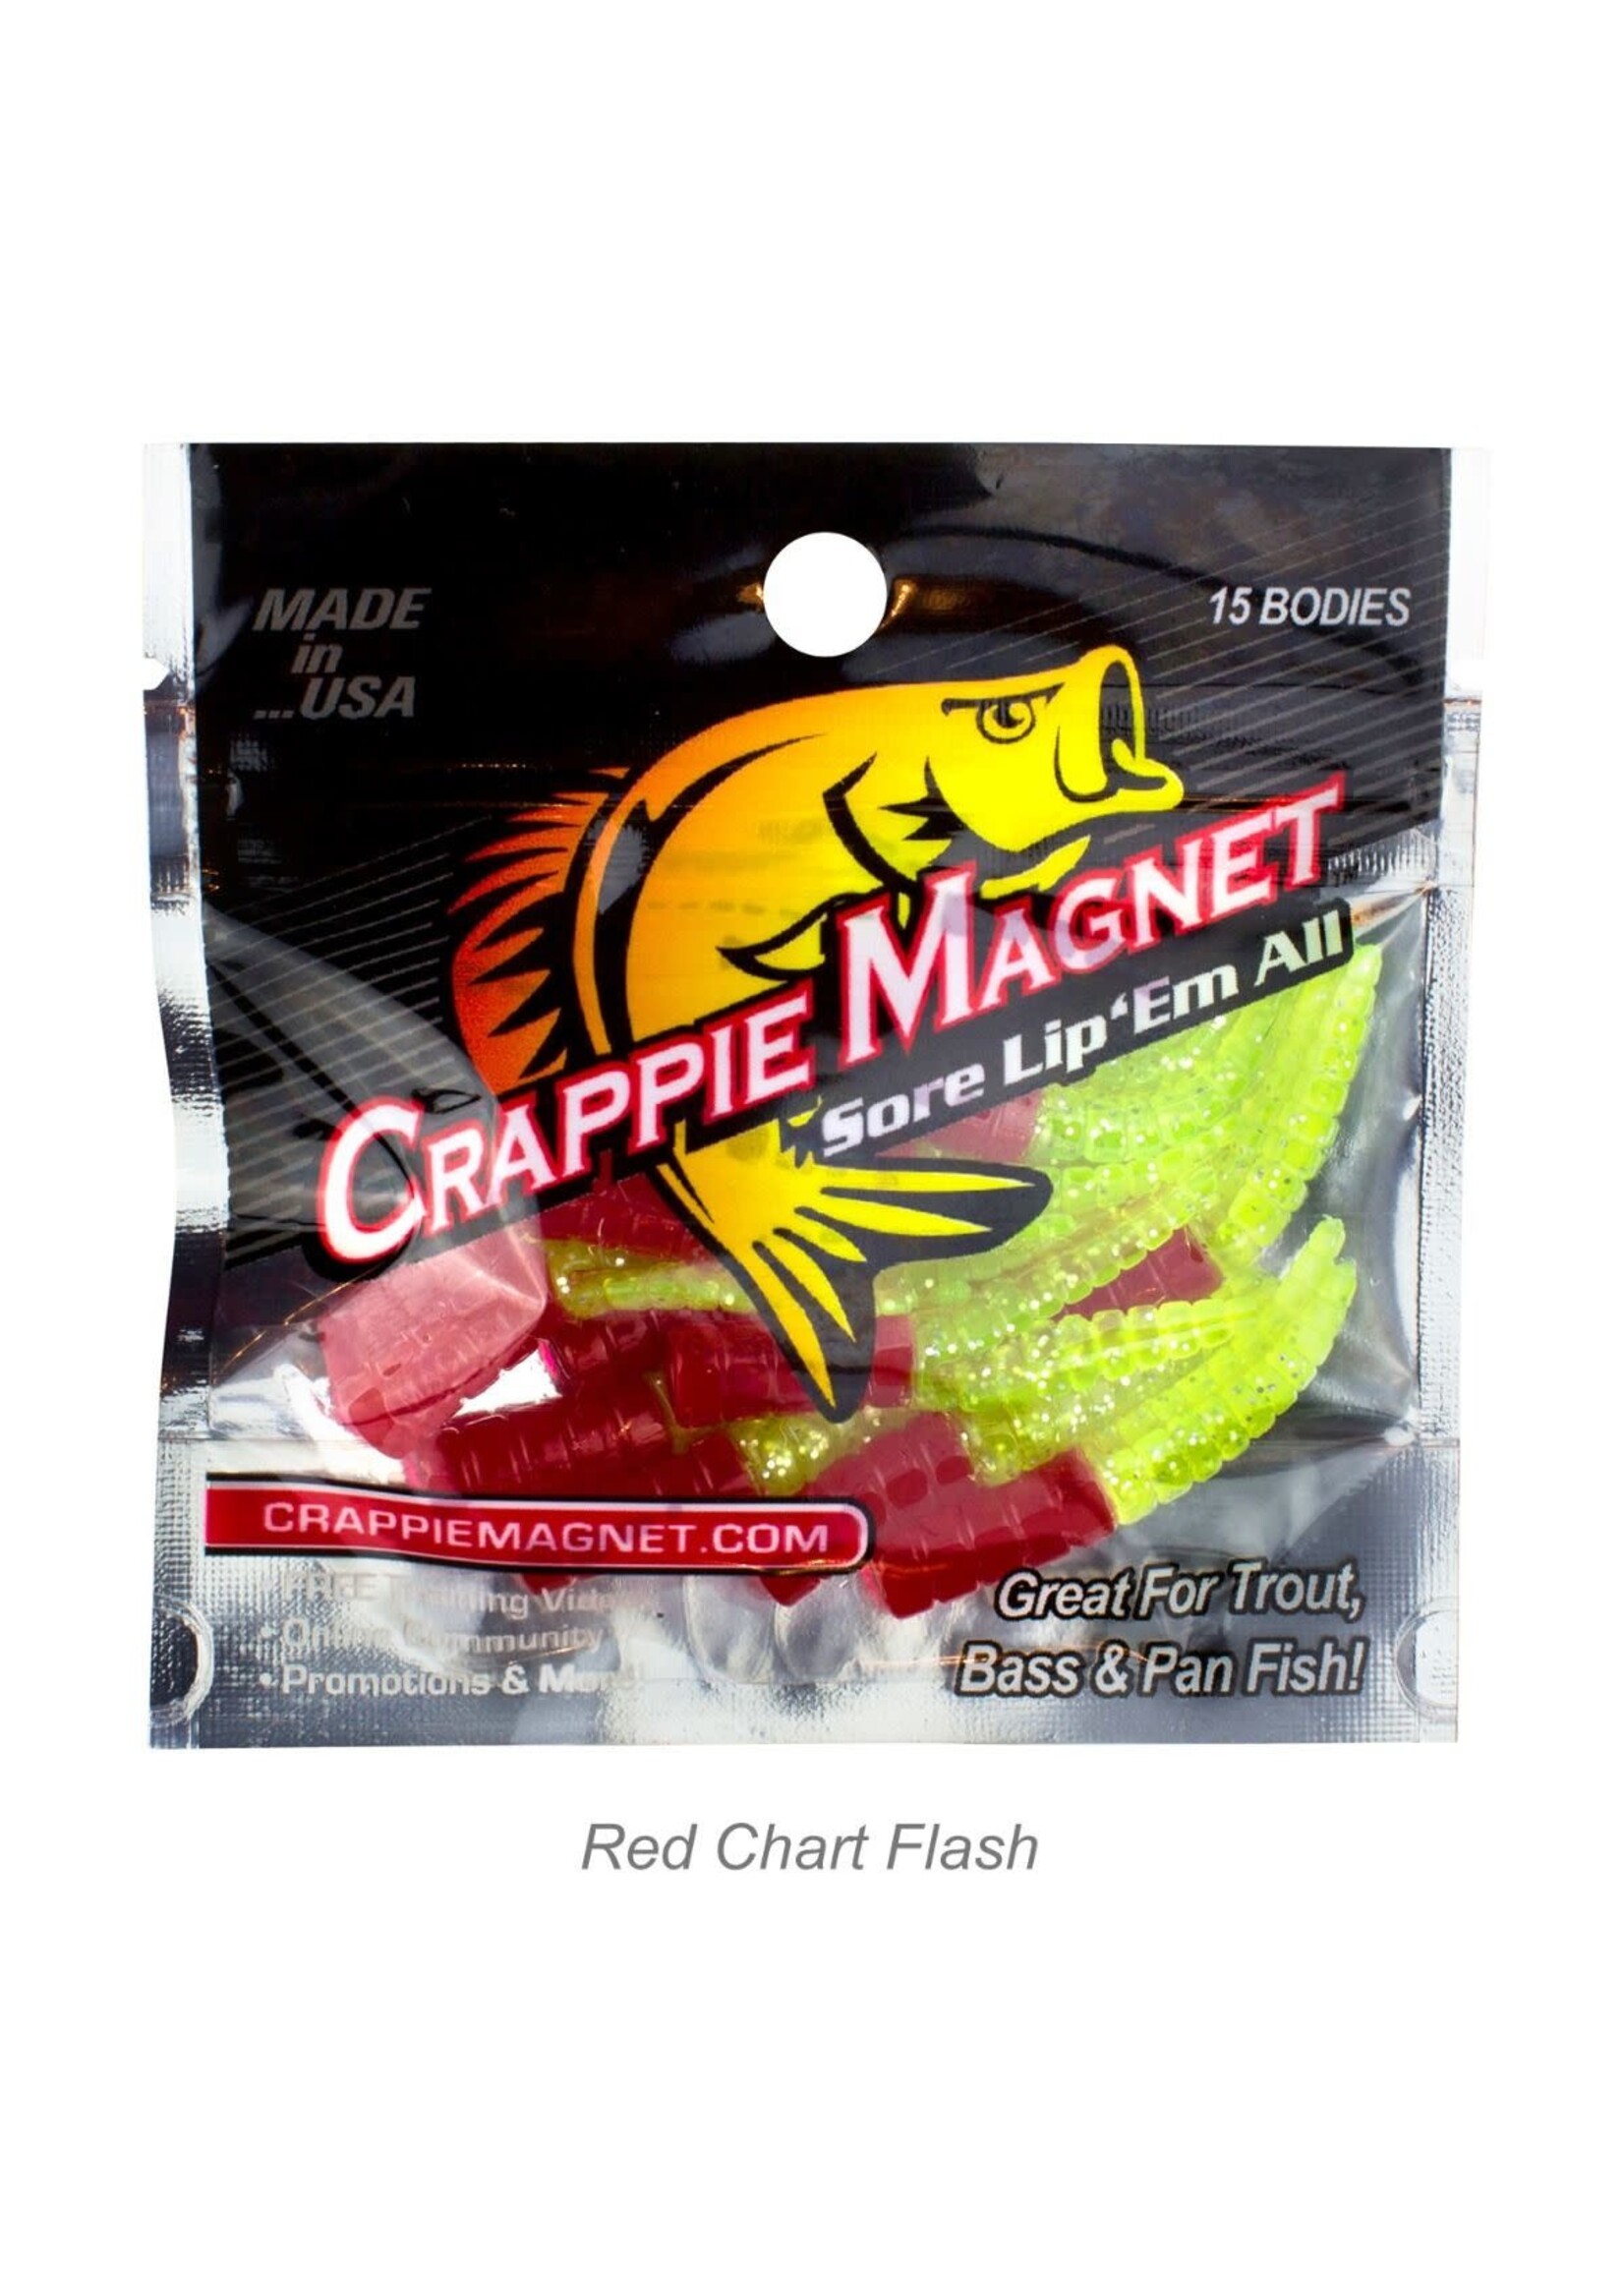 Crappie Magnet Tackle Pack Kit - Fishing Lures, Jig Hooks, Split Shots -  Designed to Catch Any Fish Including Bass, Crappie, Trout and More -  Portable